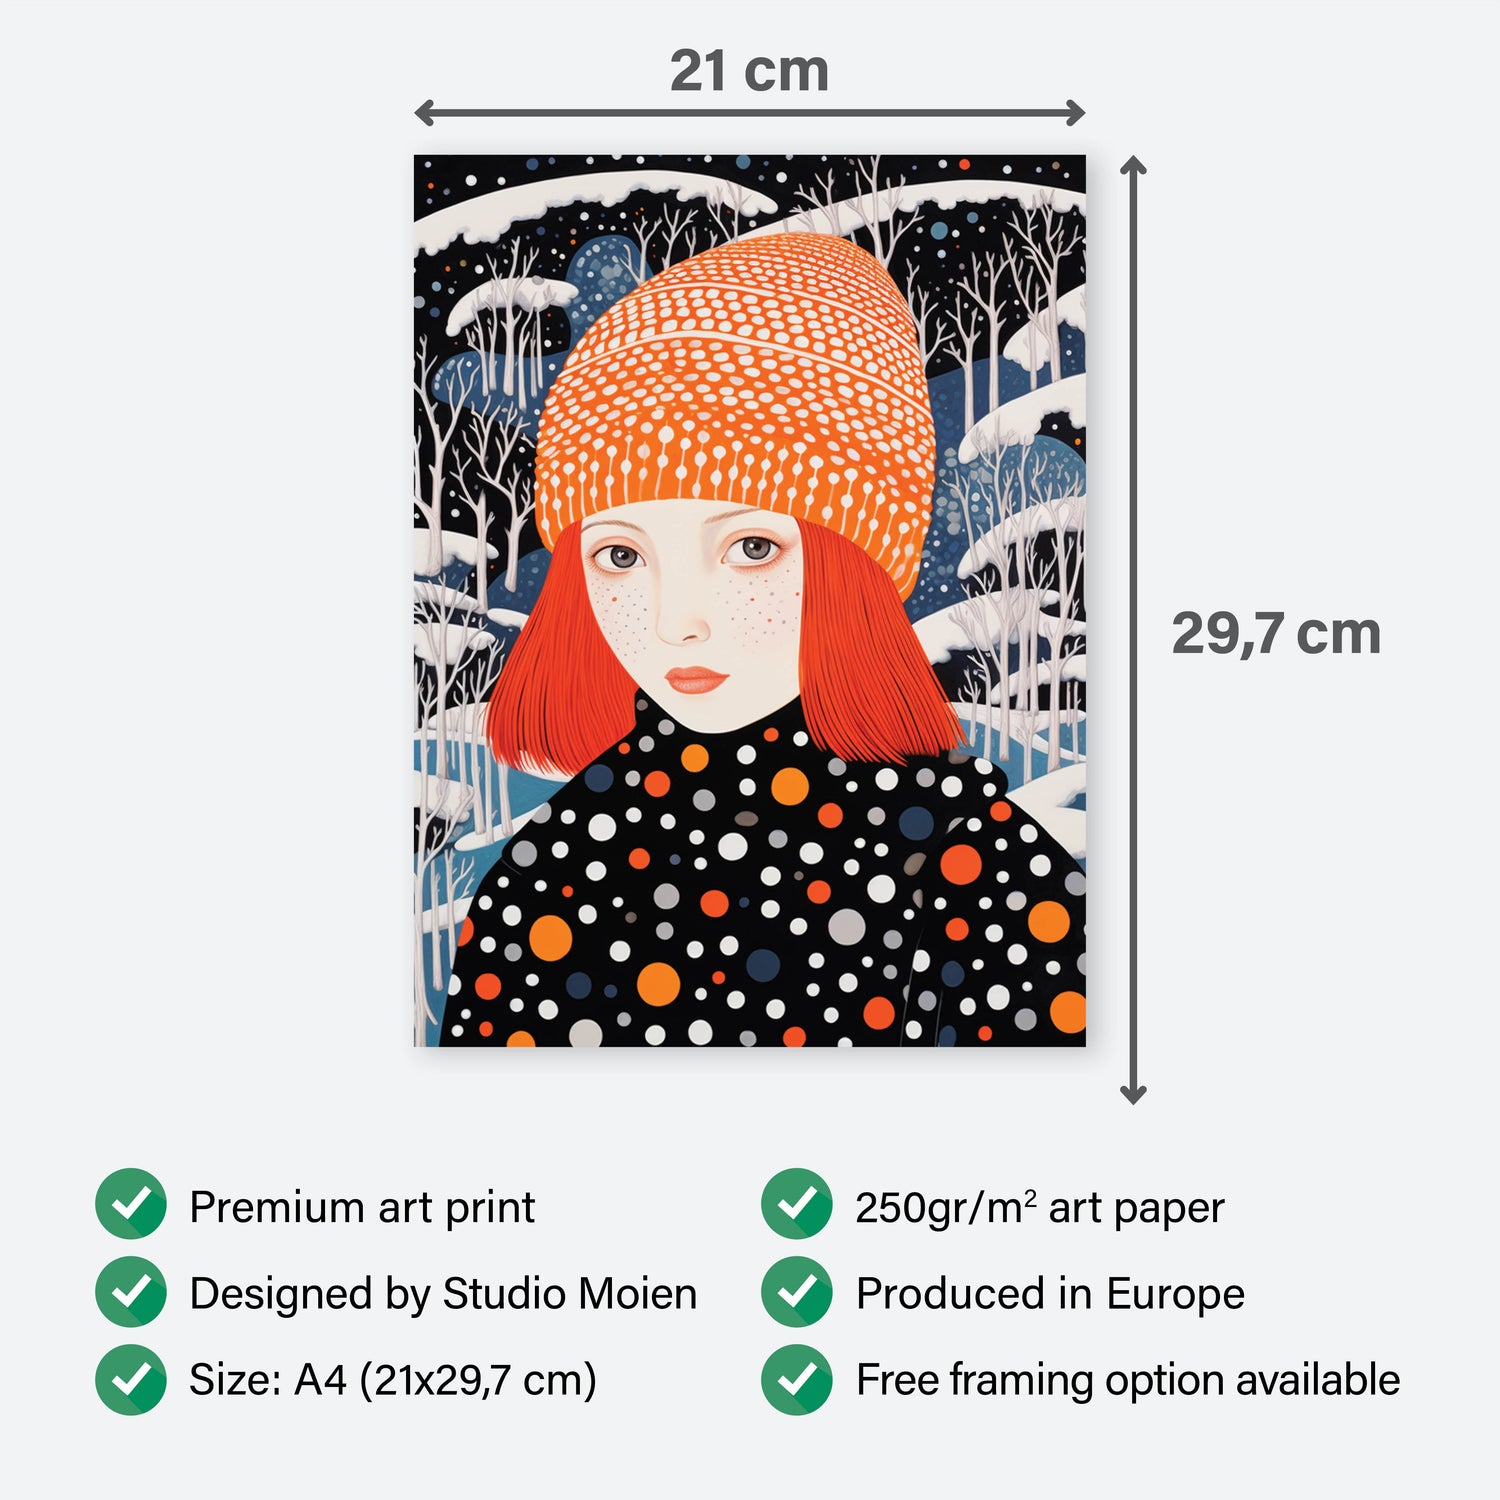 Poster The Girl Polka Dot - Add sophistication to your home